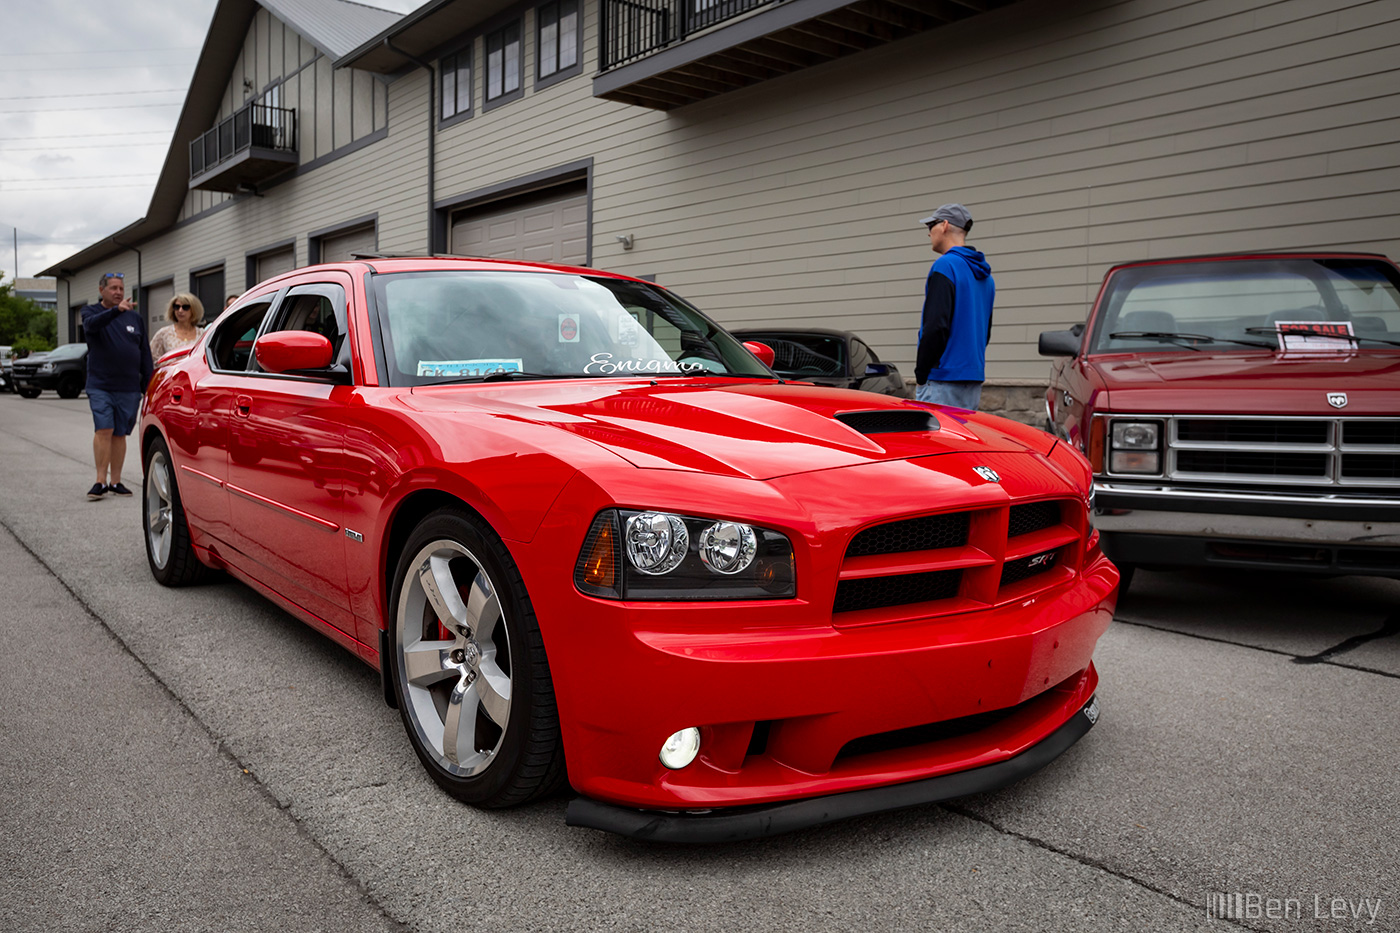 Red 2007 Dodge Charger SRT at Iron Gate Motor Condos